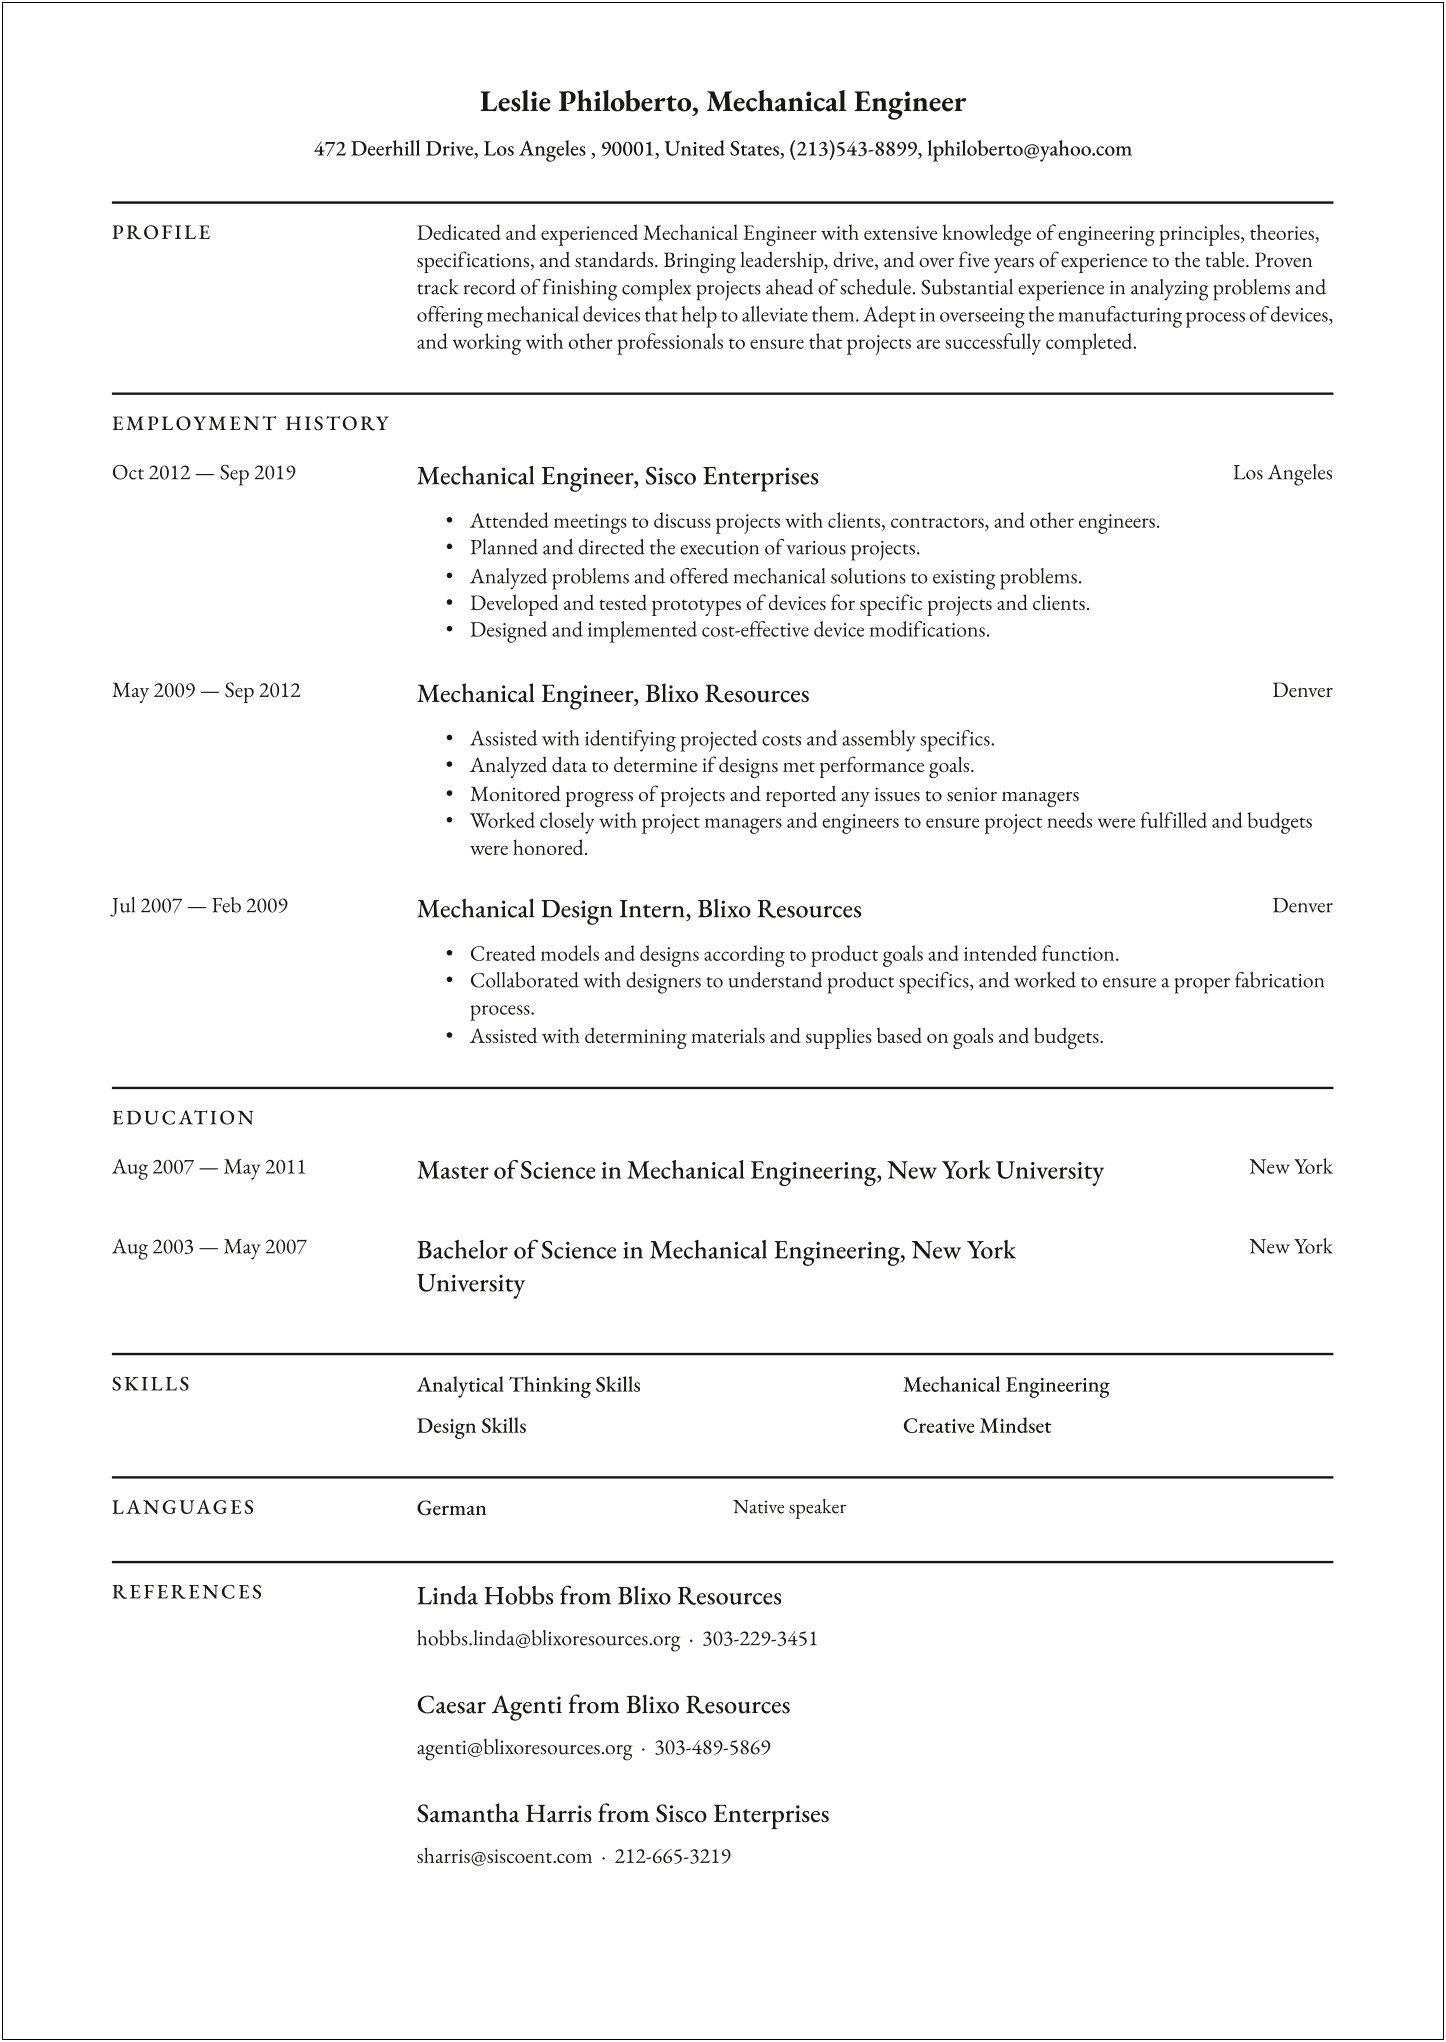 Sample Resume Format For Experienced Engineer